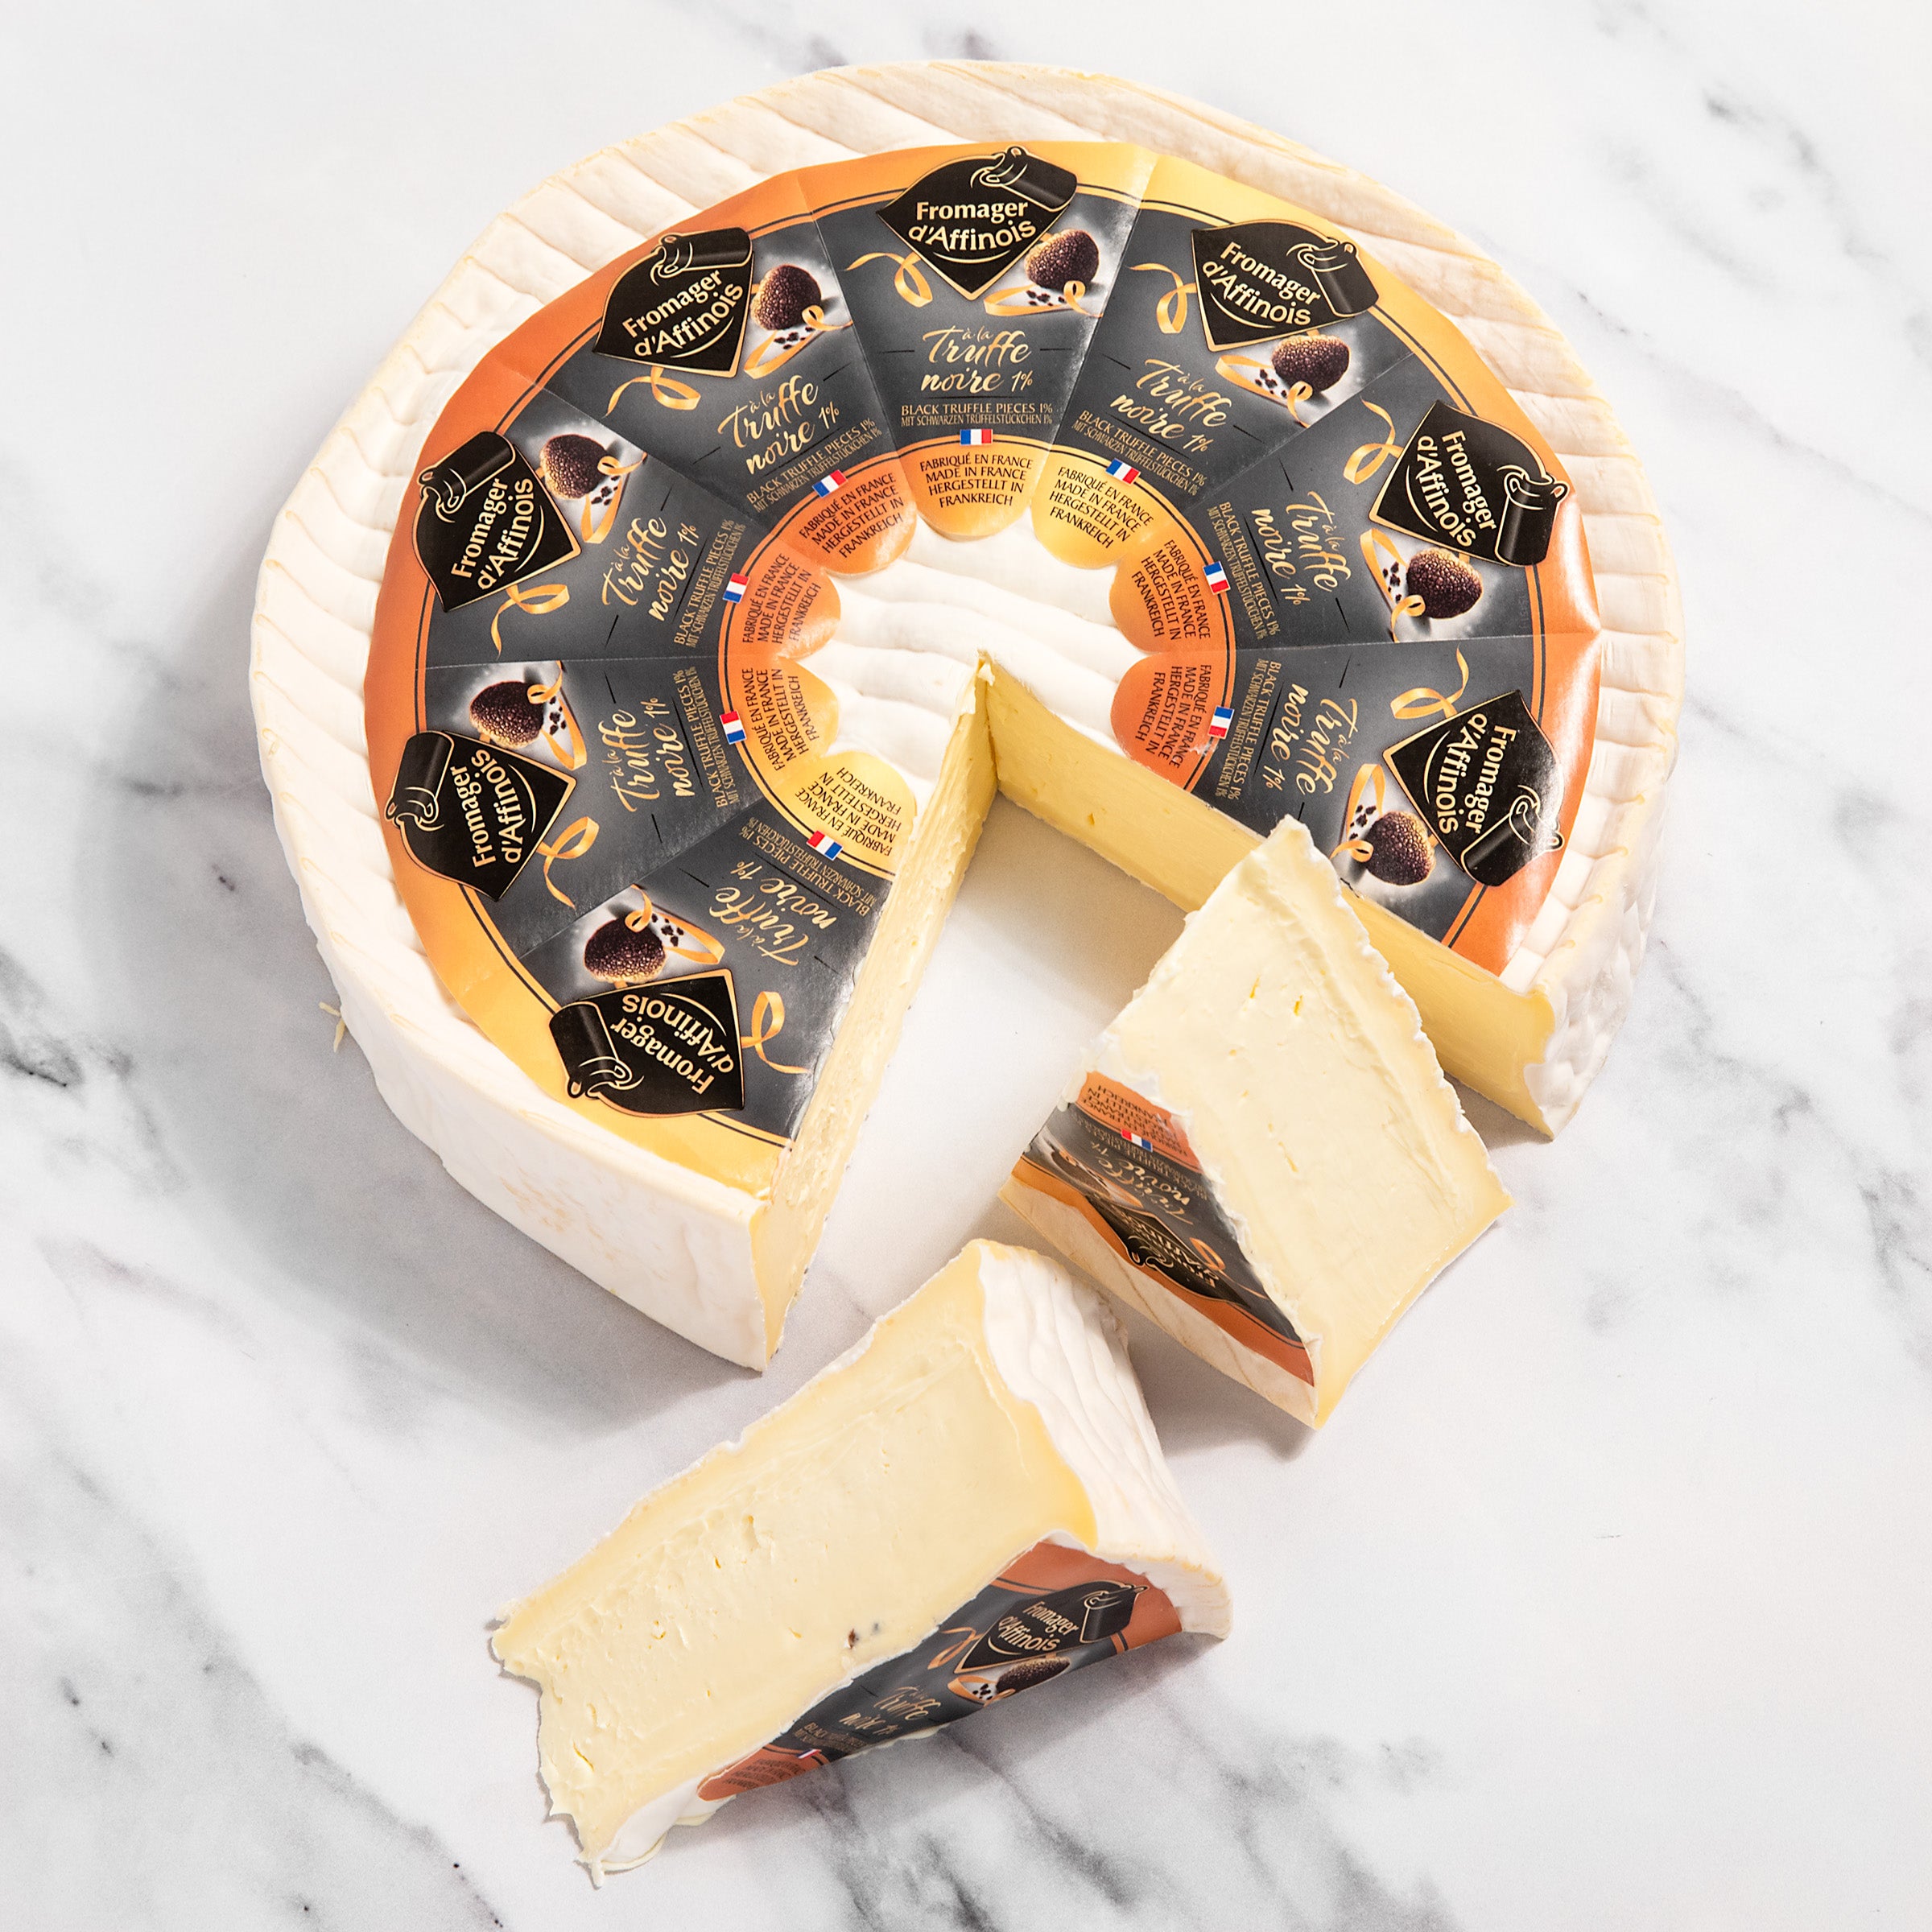 Fromage Fondant is a semi-hard cheese - L'Artisan Cheese